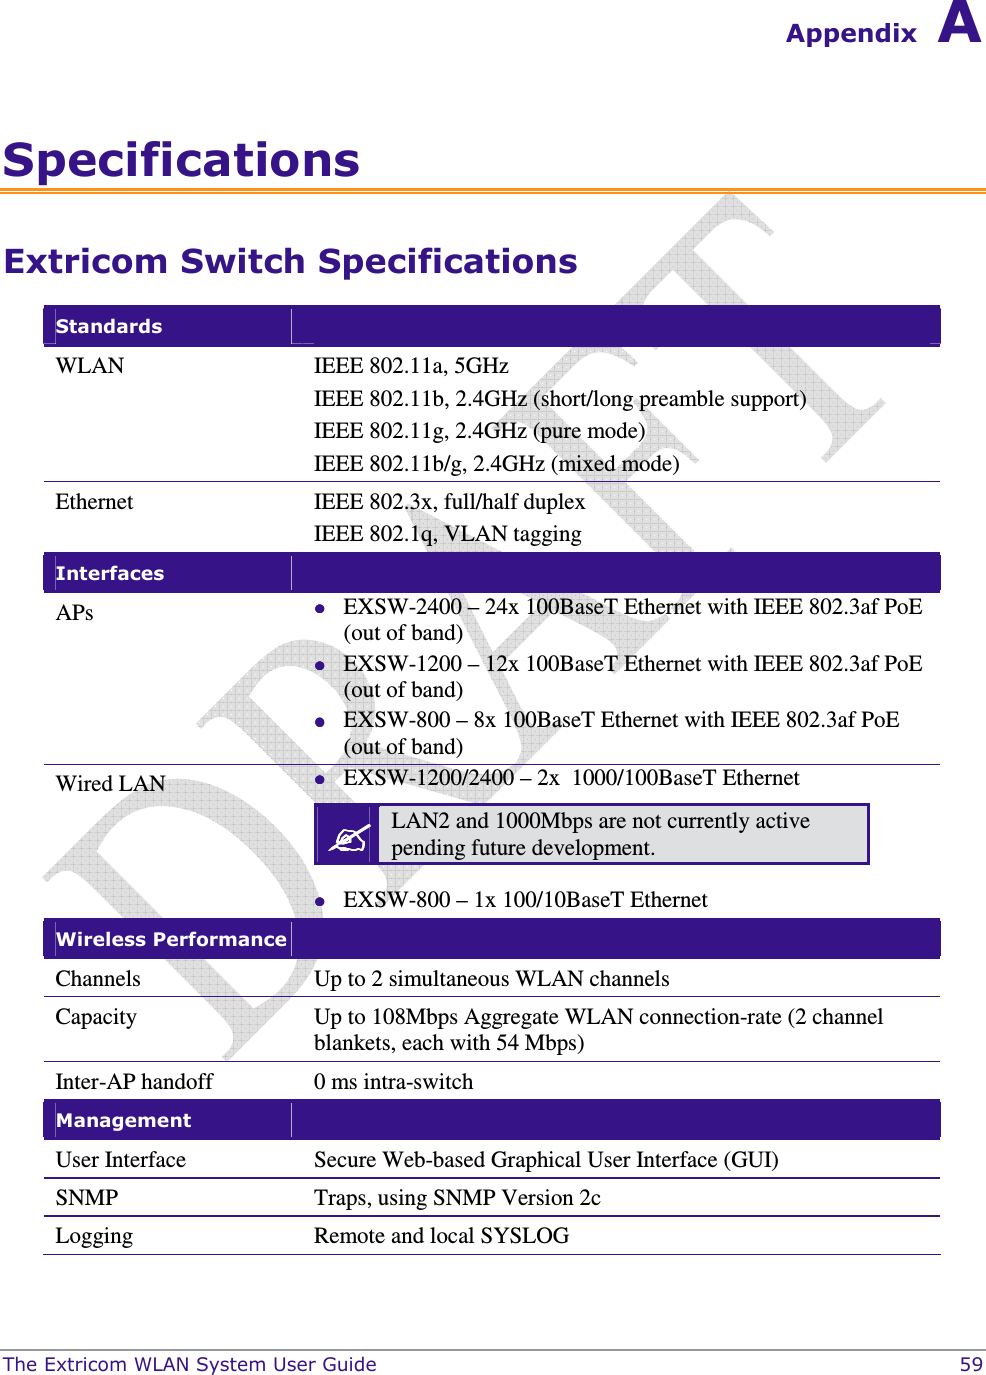  The Extricom WLAN System User Guide    59 Appendix A Specifications Extricom Switch Specifications Standards   WLAN  IEEE 802.11a, 5GHz IEEE 802.11b, 2.4GHz (short/long preamble support) IEEE 802.11g, 2.4GHz (pure mode) IEEE 802.11b/g, 2.4GHz (mixed mode) Ethernet  IEEE 802.3x, full/half duplex IEEE 802.1q, VLAN tagging Interfaces   APs   EXSW-2400 – 24x 100BaseT Ethernet with IEEE 802.3af PoE (out of band)  EXSW-1200 – 12x 100BaseT Ethernet with IEEE 802.3af PoE (out of band)  EXSW-800 – 8x 100BaseT Ethernet with IEEE 802.3af PoE (out of band) Wired LAN   EXSW-1200/2400 – 2x  1000/100BaseT Ethernet     EXSW-800 – 1x 100/10BaseT Ethernet  LAN2 and 1000Mbps are not currently active pending future development. Wireless Performance   Channels  Up to 2 simultaneous WLAN channels  Capacity  Up to 108Mbps Aggregate WLAN connection-rate (2 channel blankets, each with 54 Mbps) Inter-AP handoff   0 ms intra-switch Management   User Interface  Secure Web-based Graphical User Interface (GUI)  SNMP  Traps, using SNMP Version 2c Logging  Remote and local SYSLOG 